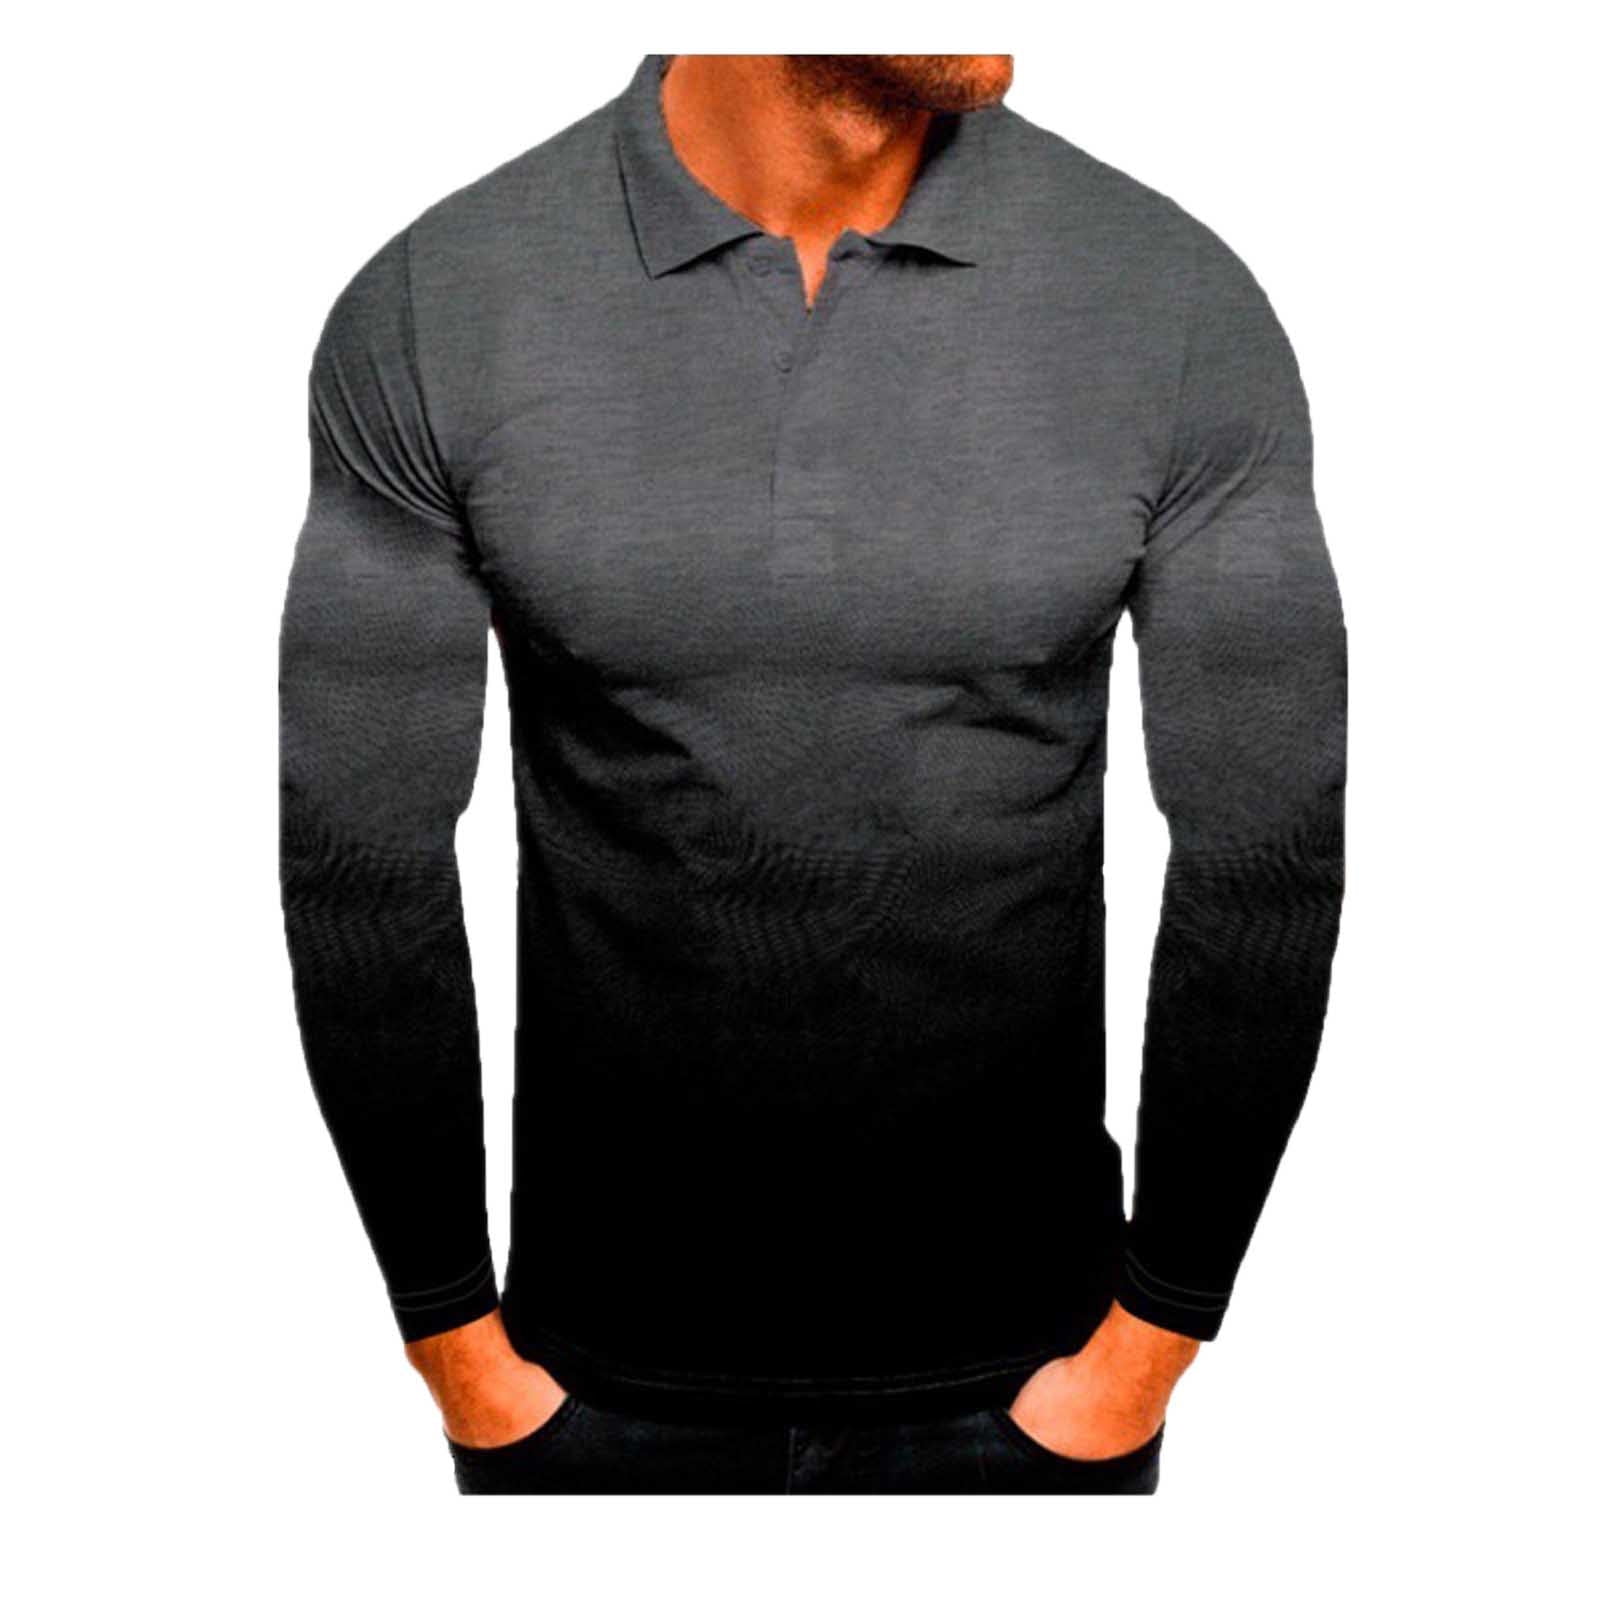 Oalirro Long Sleeve Tee Shirts for Men Deals Clearance Men's Printing ...